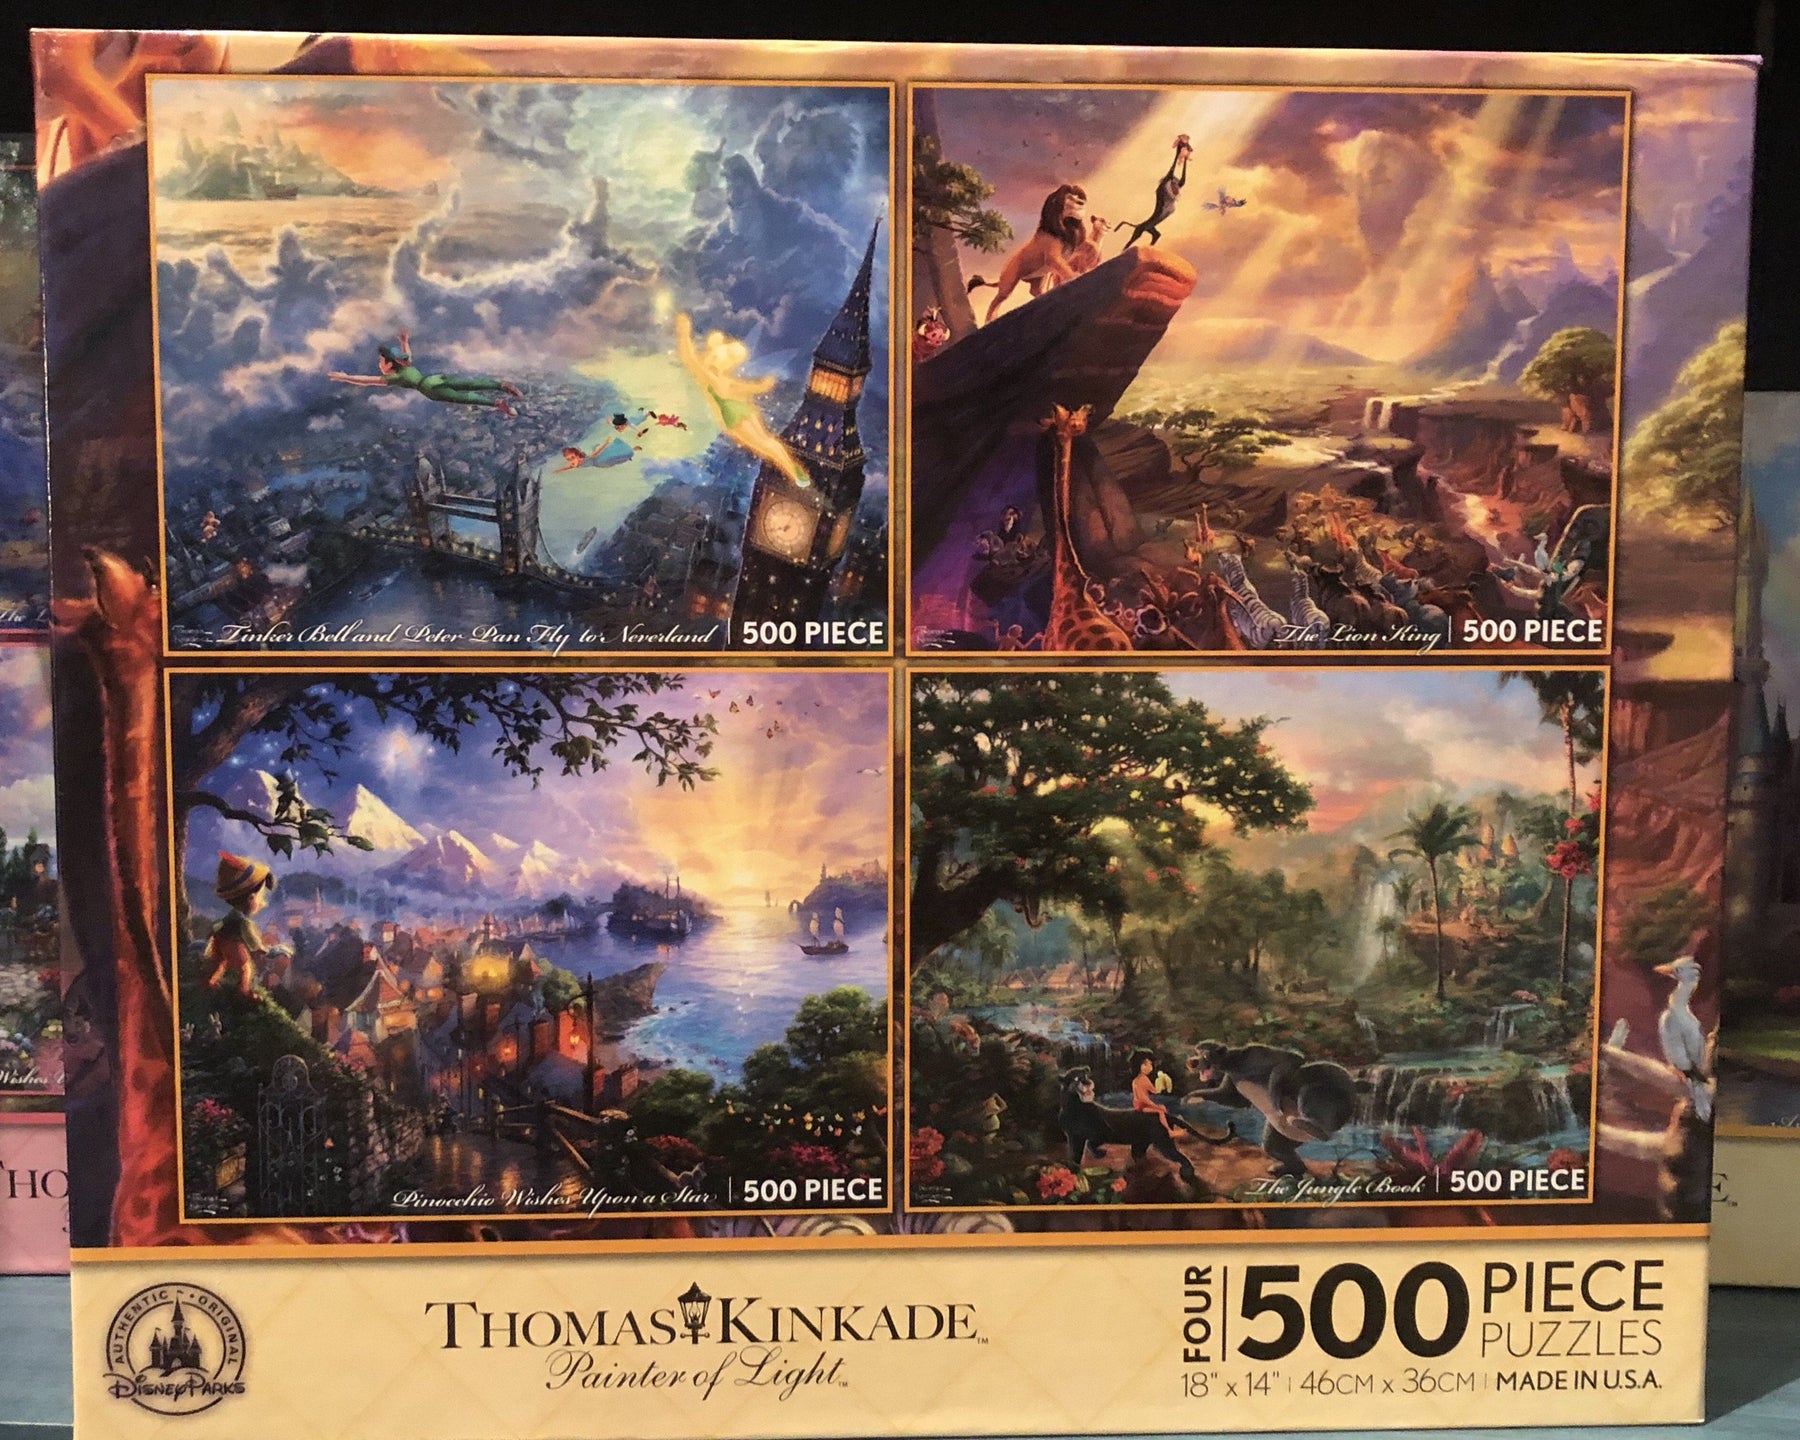 DLR - 4 x 500 Piece Disney Parks Puzzle by Thomas Kinkade - Peter Pan/The Lion King/Pinocchio/The Jungle Book